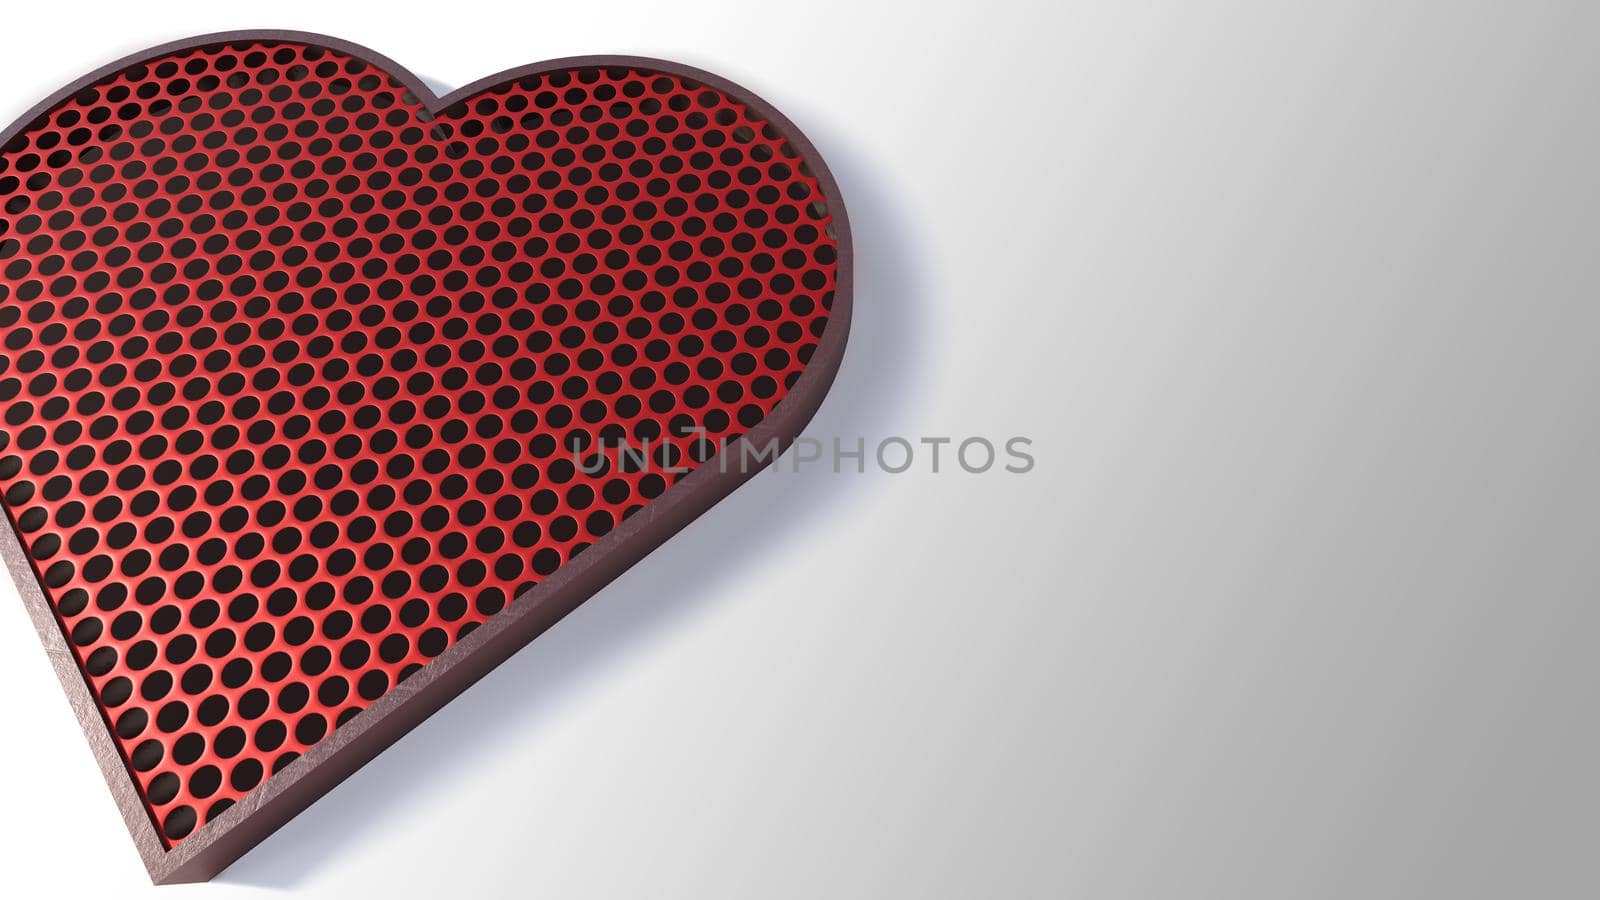 A 3d rendering image of heart sign made from steel and steel wire mesh.